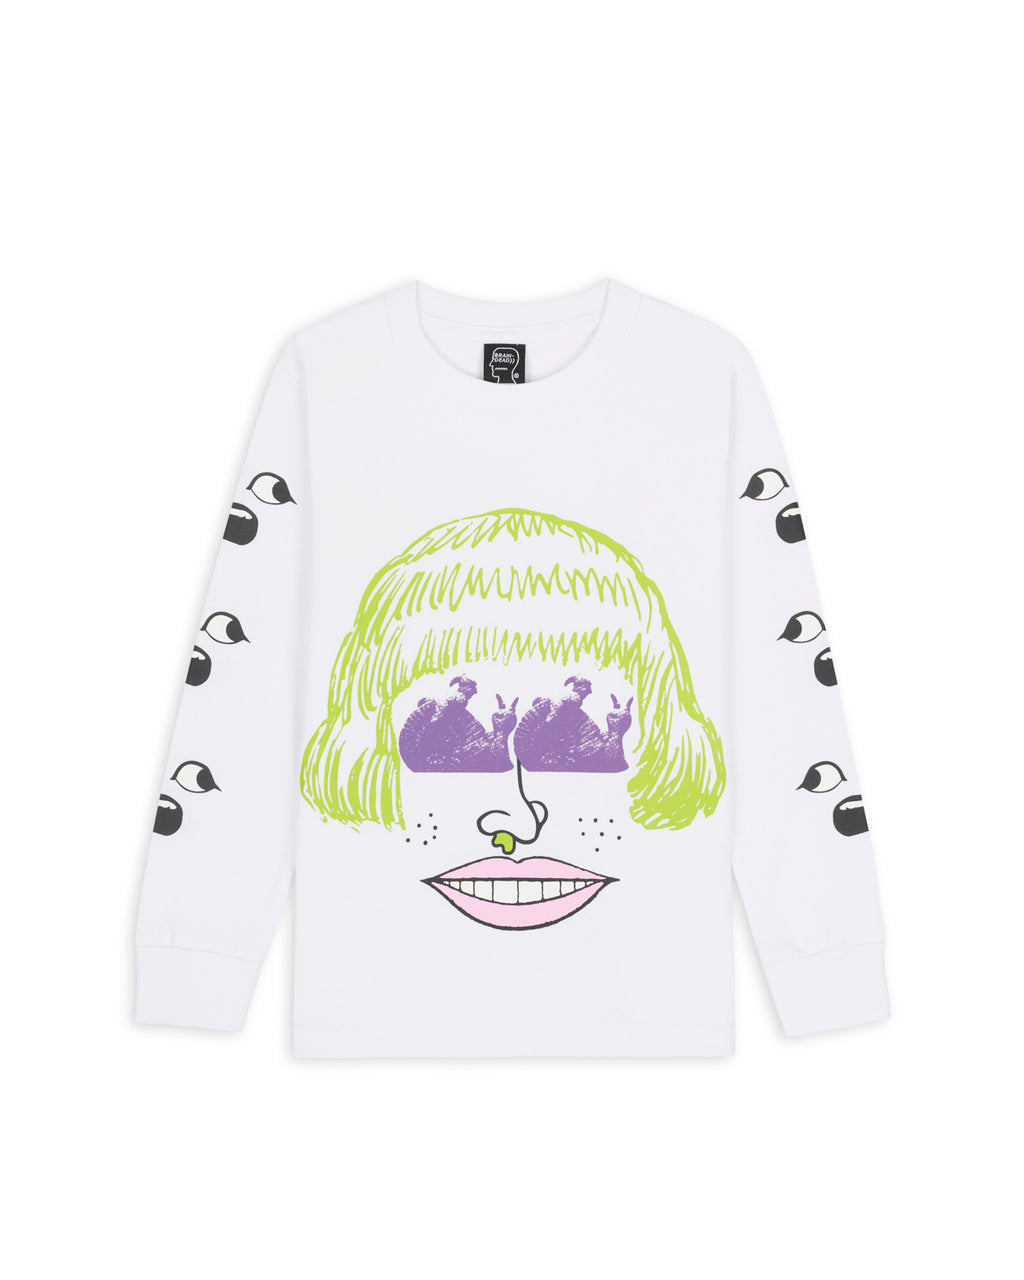 Snails And Snot Kids Long Sleeve - White